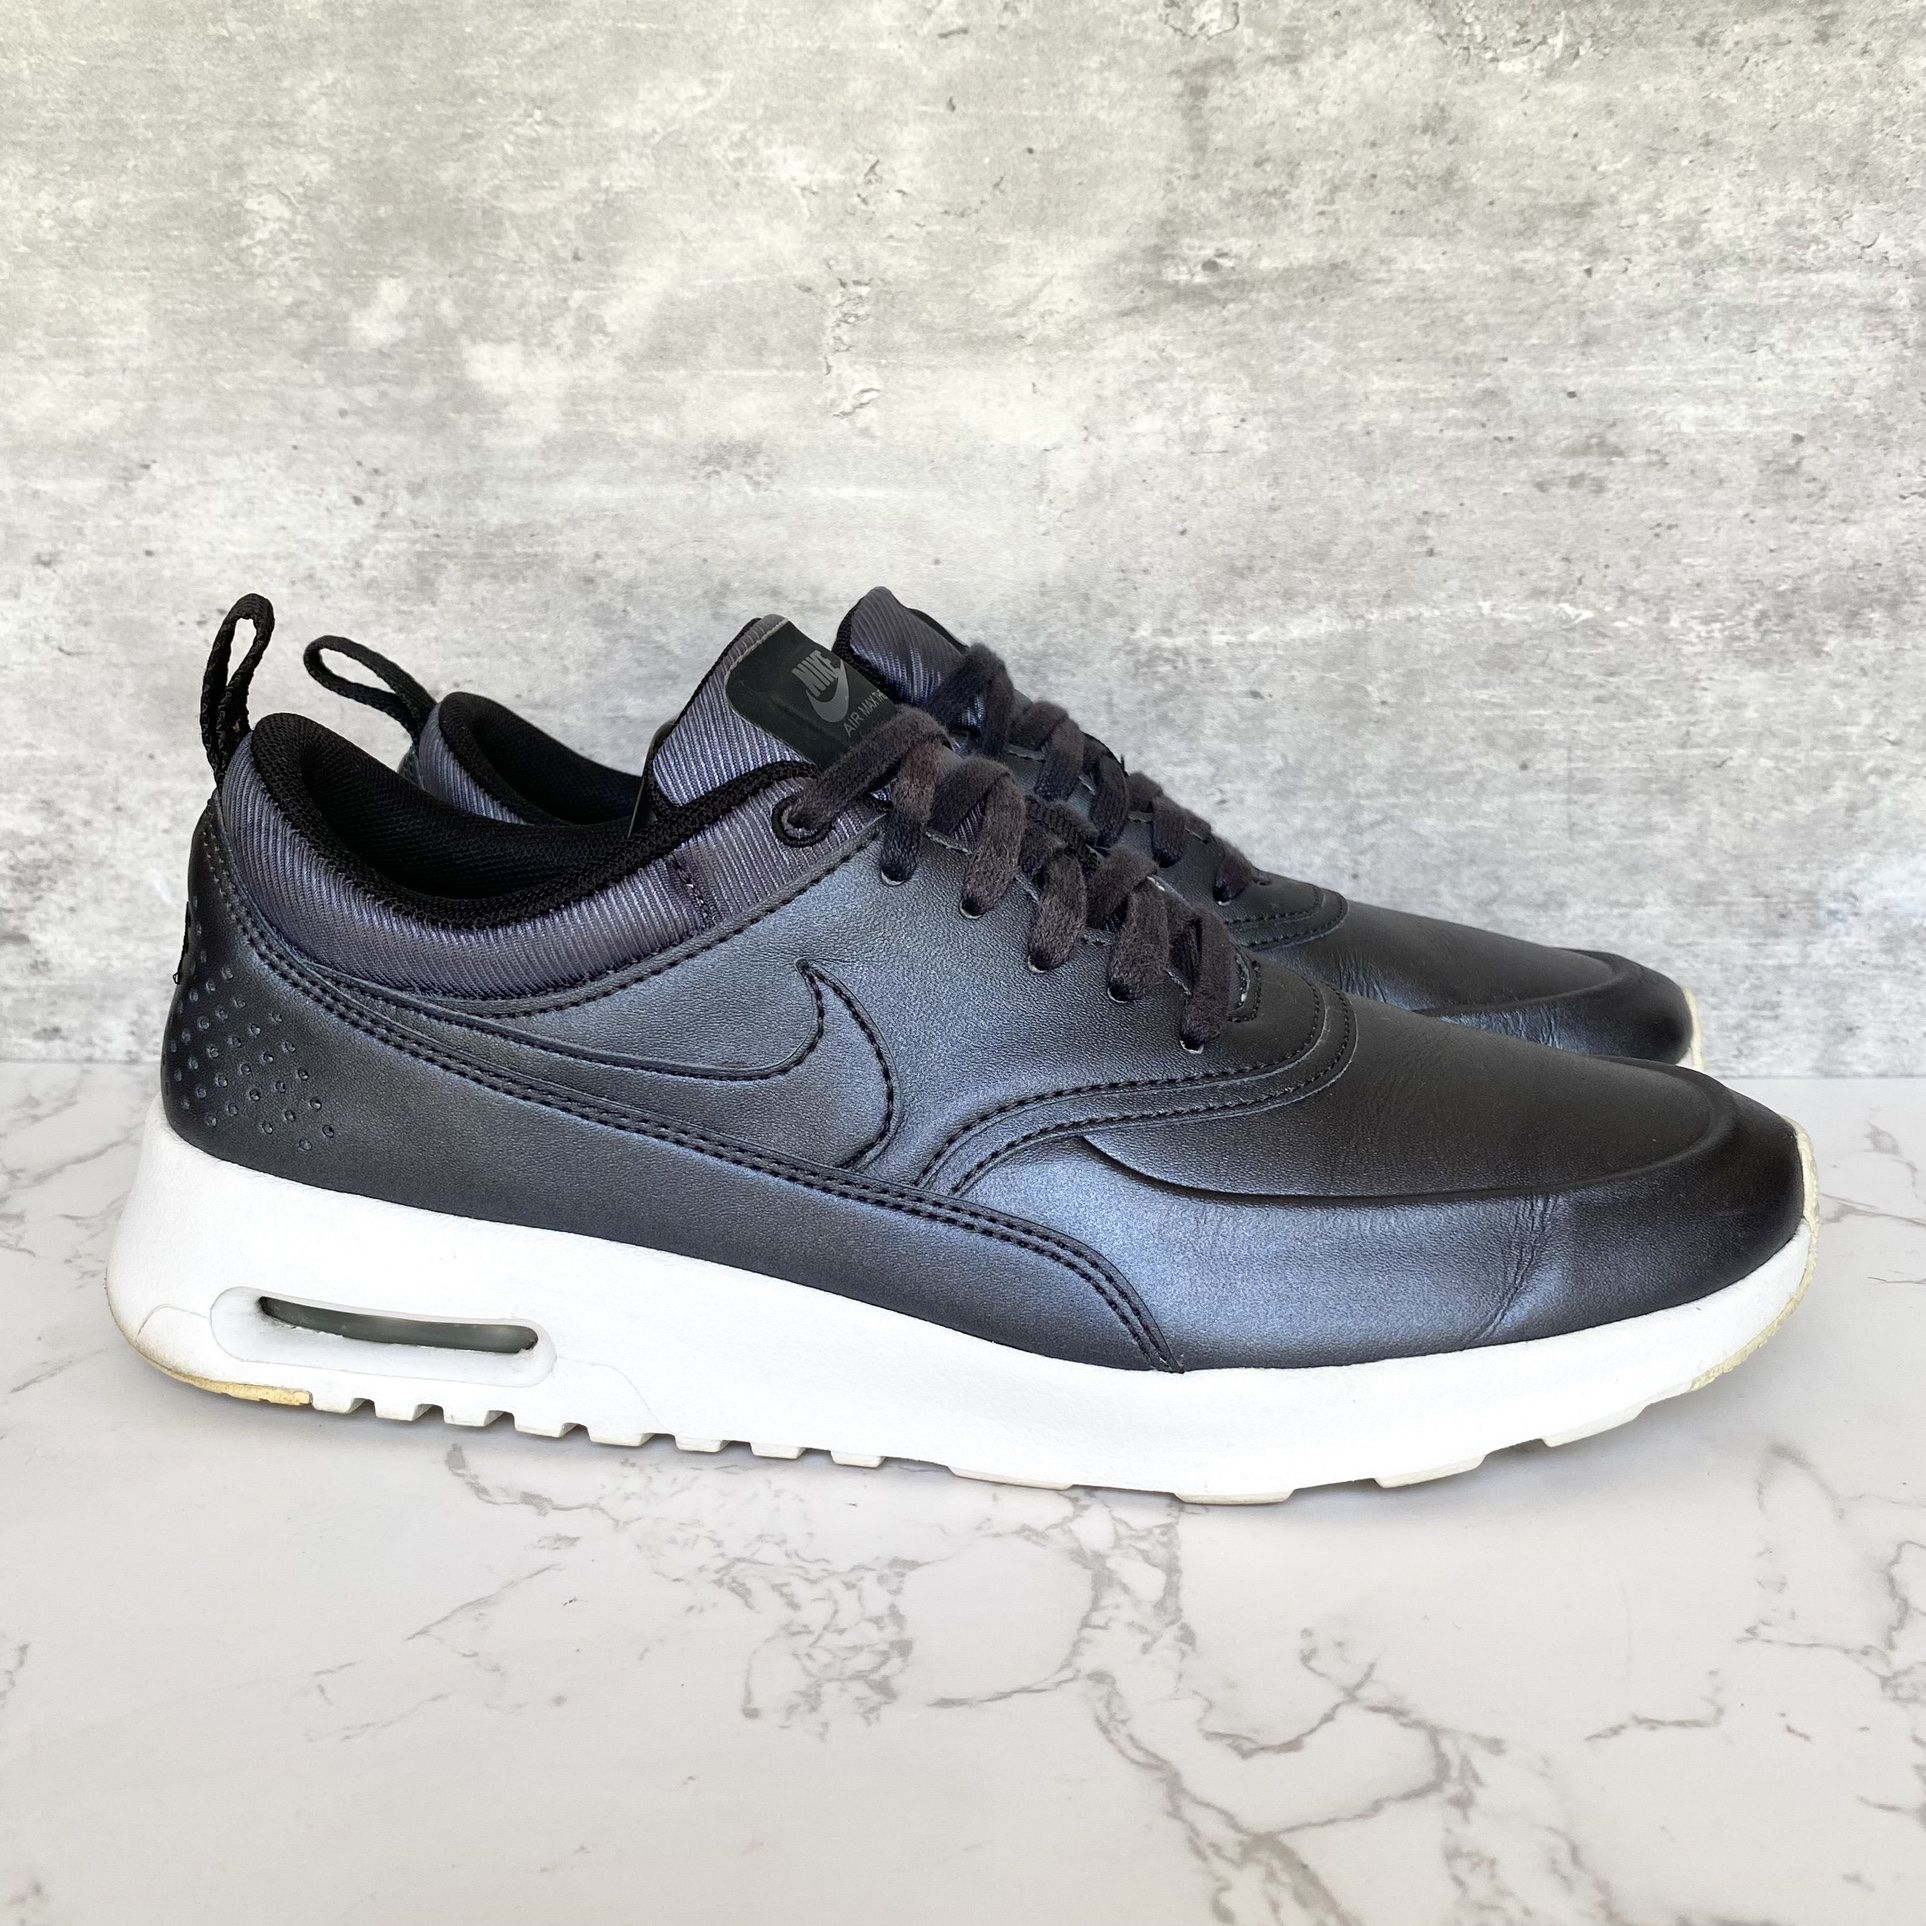 beu Grap Uithoudingsvermogen Nike Air Max Thea Se Metallic Blue Running Shoes Women's 8.5 for Sale in  Valrico, FL - OfferUp